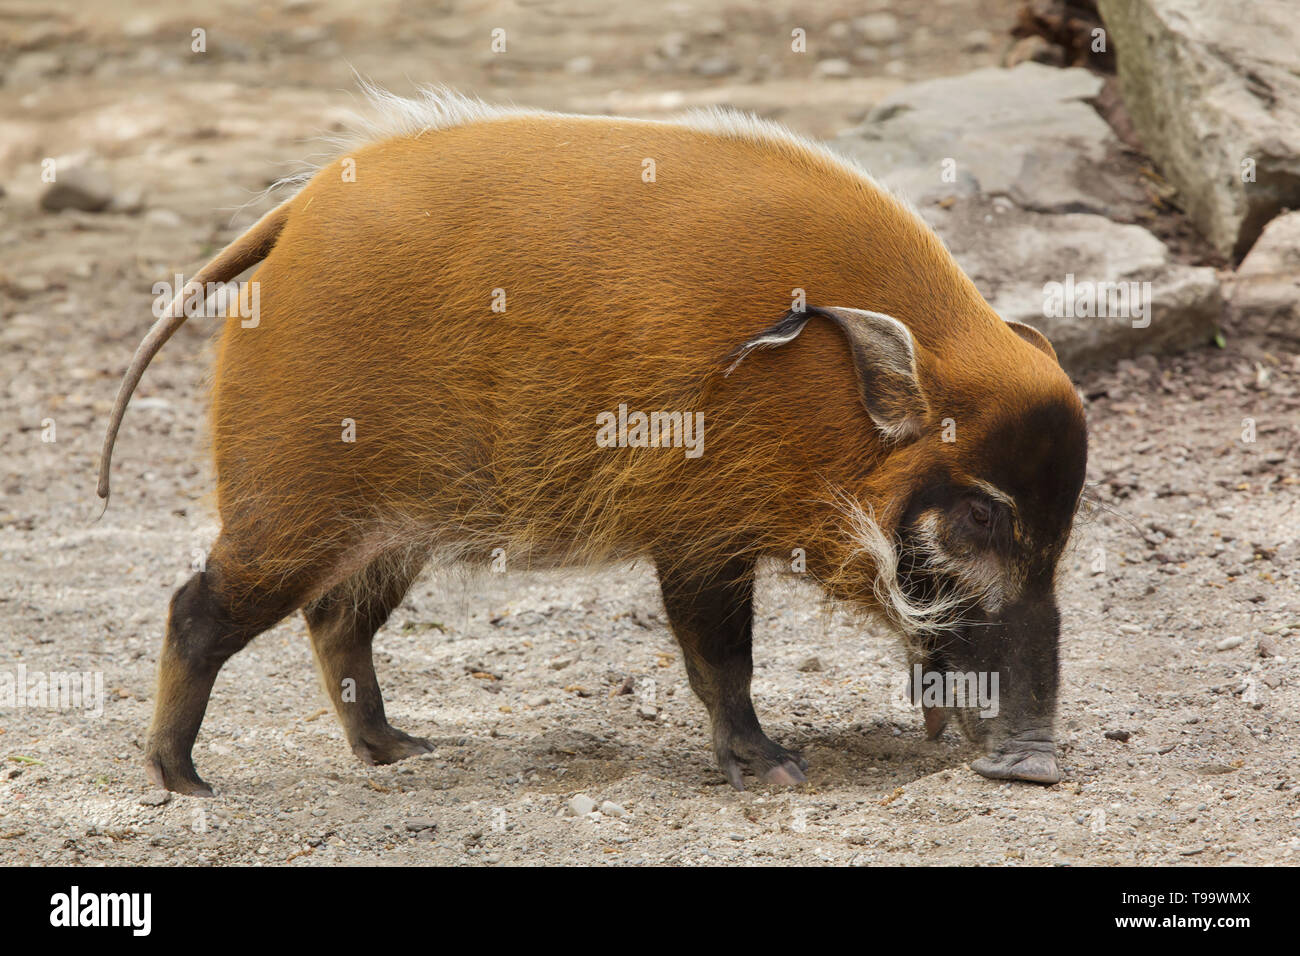 Red river hog (Potamochoerus porcus), also known as the bush pig. Stock Photo